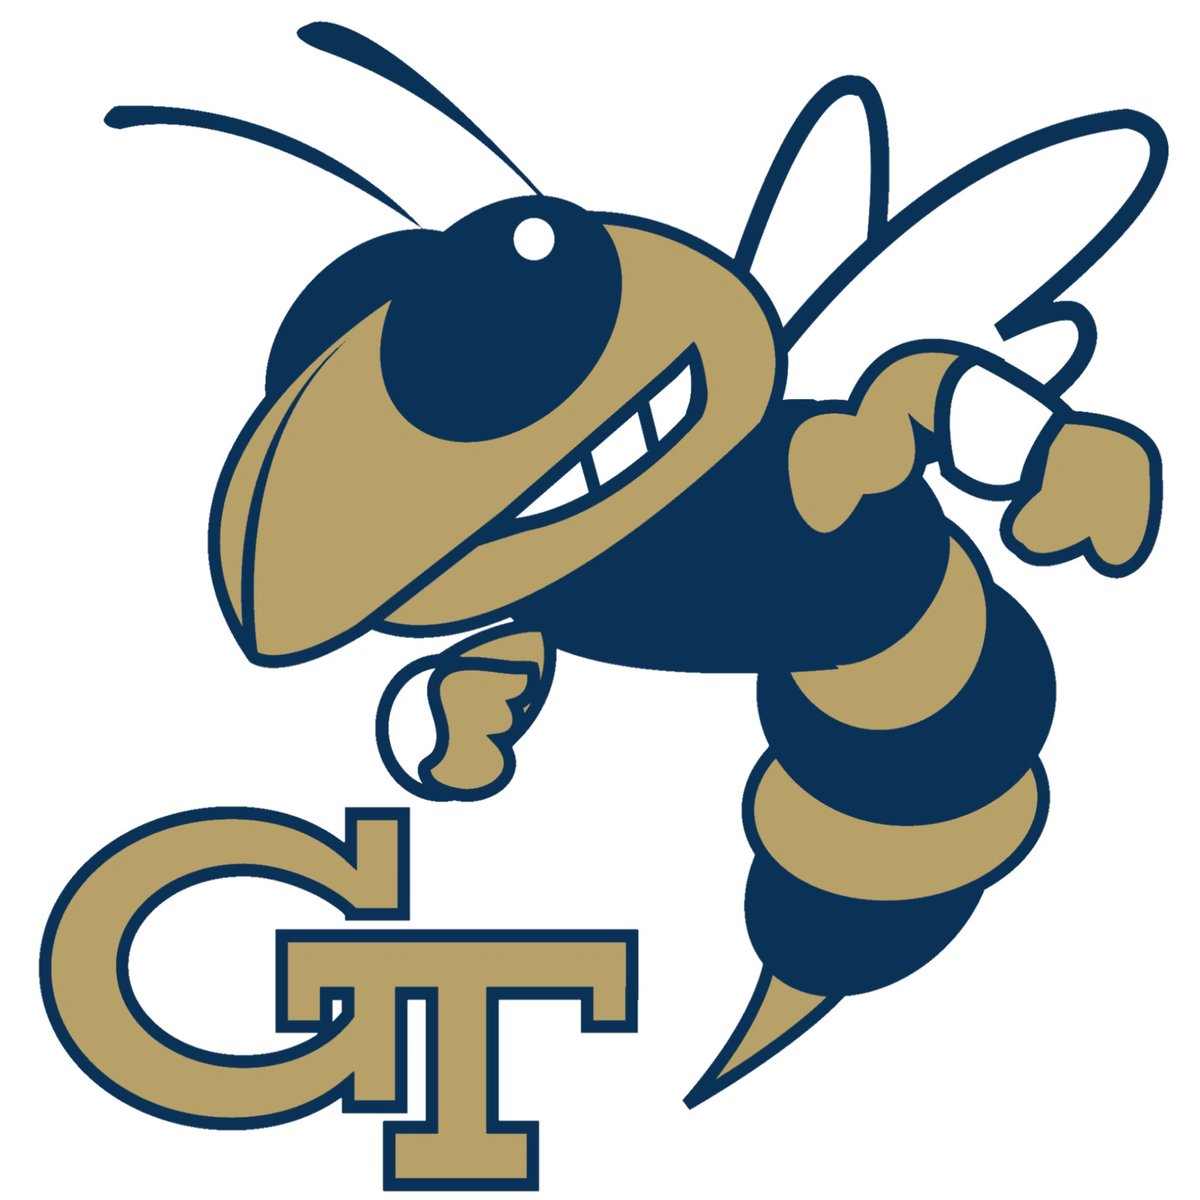 Blessed to receive an offer from Georgia Tech!! @TheOfficialPFFB @CoachTC22 @CoachJayKM @C3Elite7v7 @CoachTMcKnight @corypeoples @adamgorney @ChadSimmons_ @JohnGarcia_Jr @MohrRecruiting @RyanWrightRNG @SWiltfong_ @TheSteamWhistle @SouthRecruiting